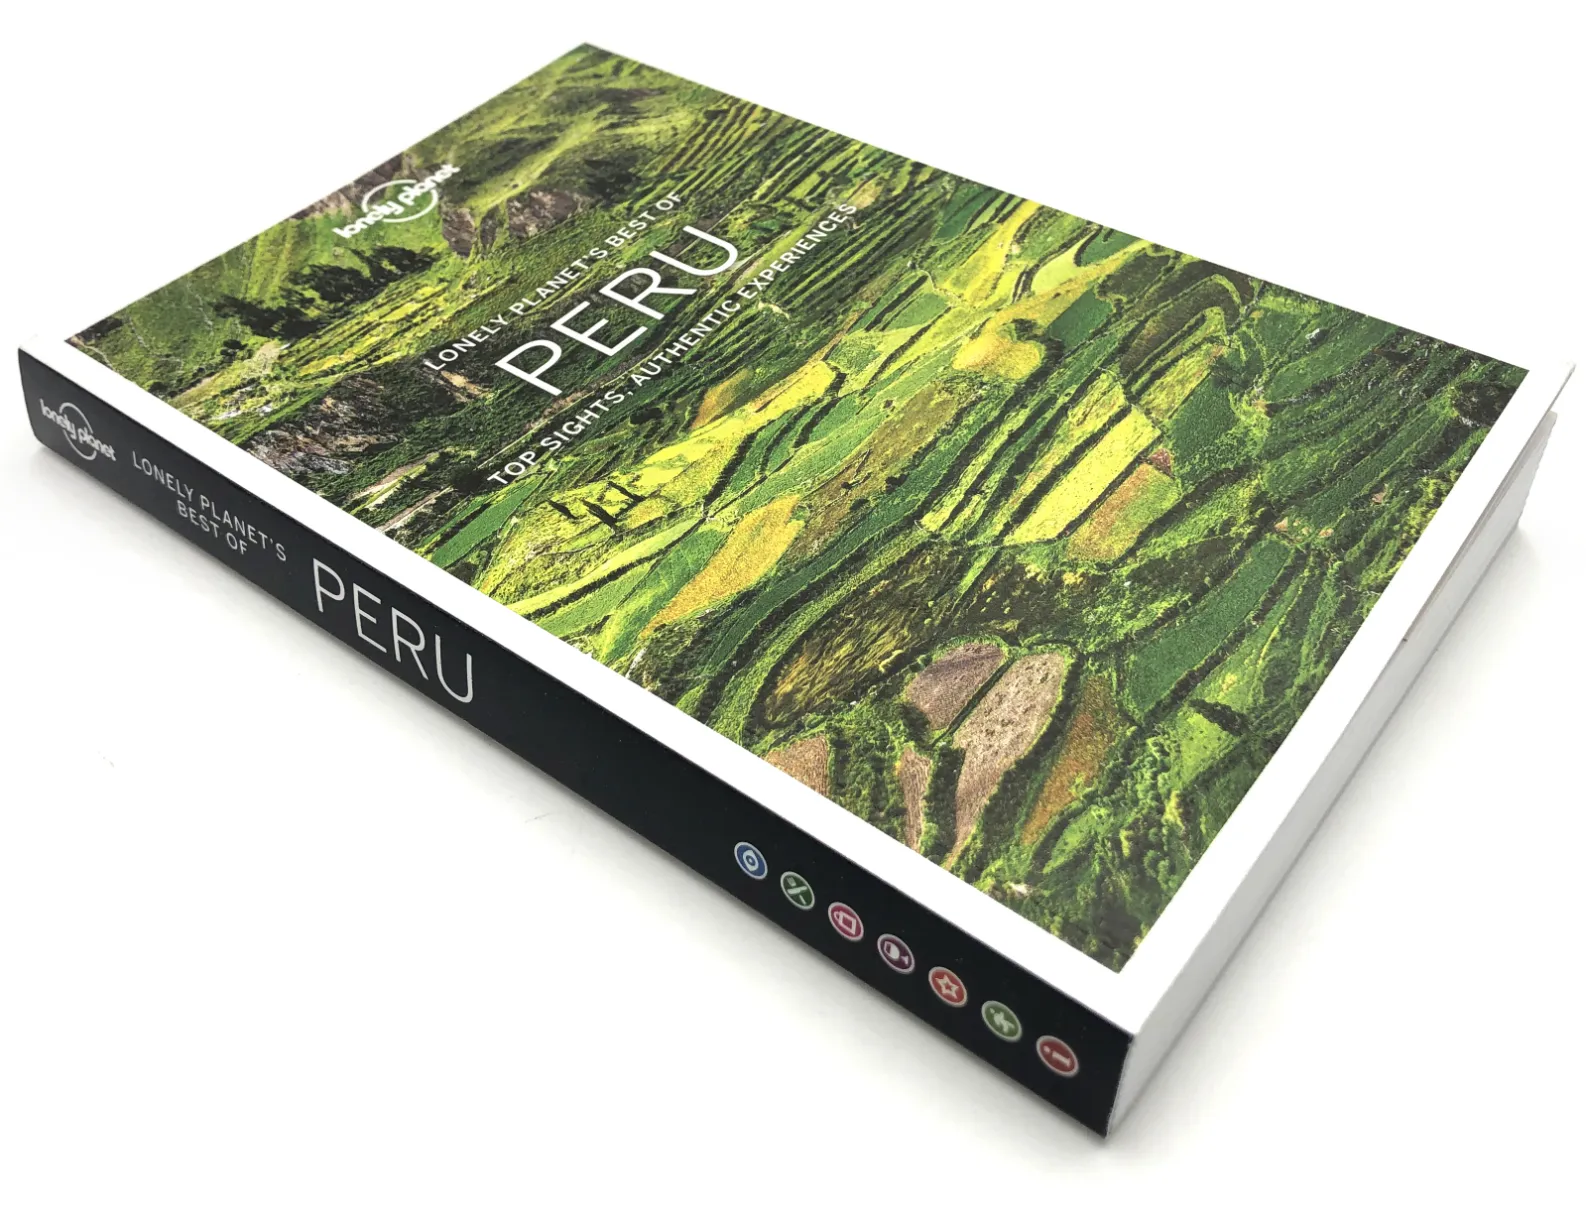 Shenzhen custom softcover paperback for Lonely Planet soft cover printing print book